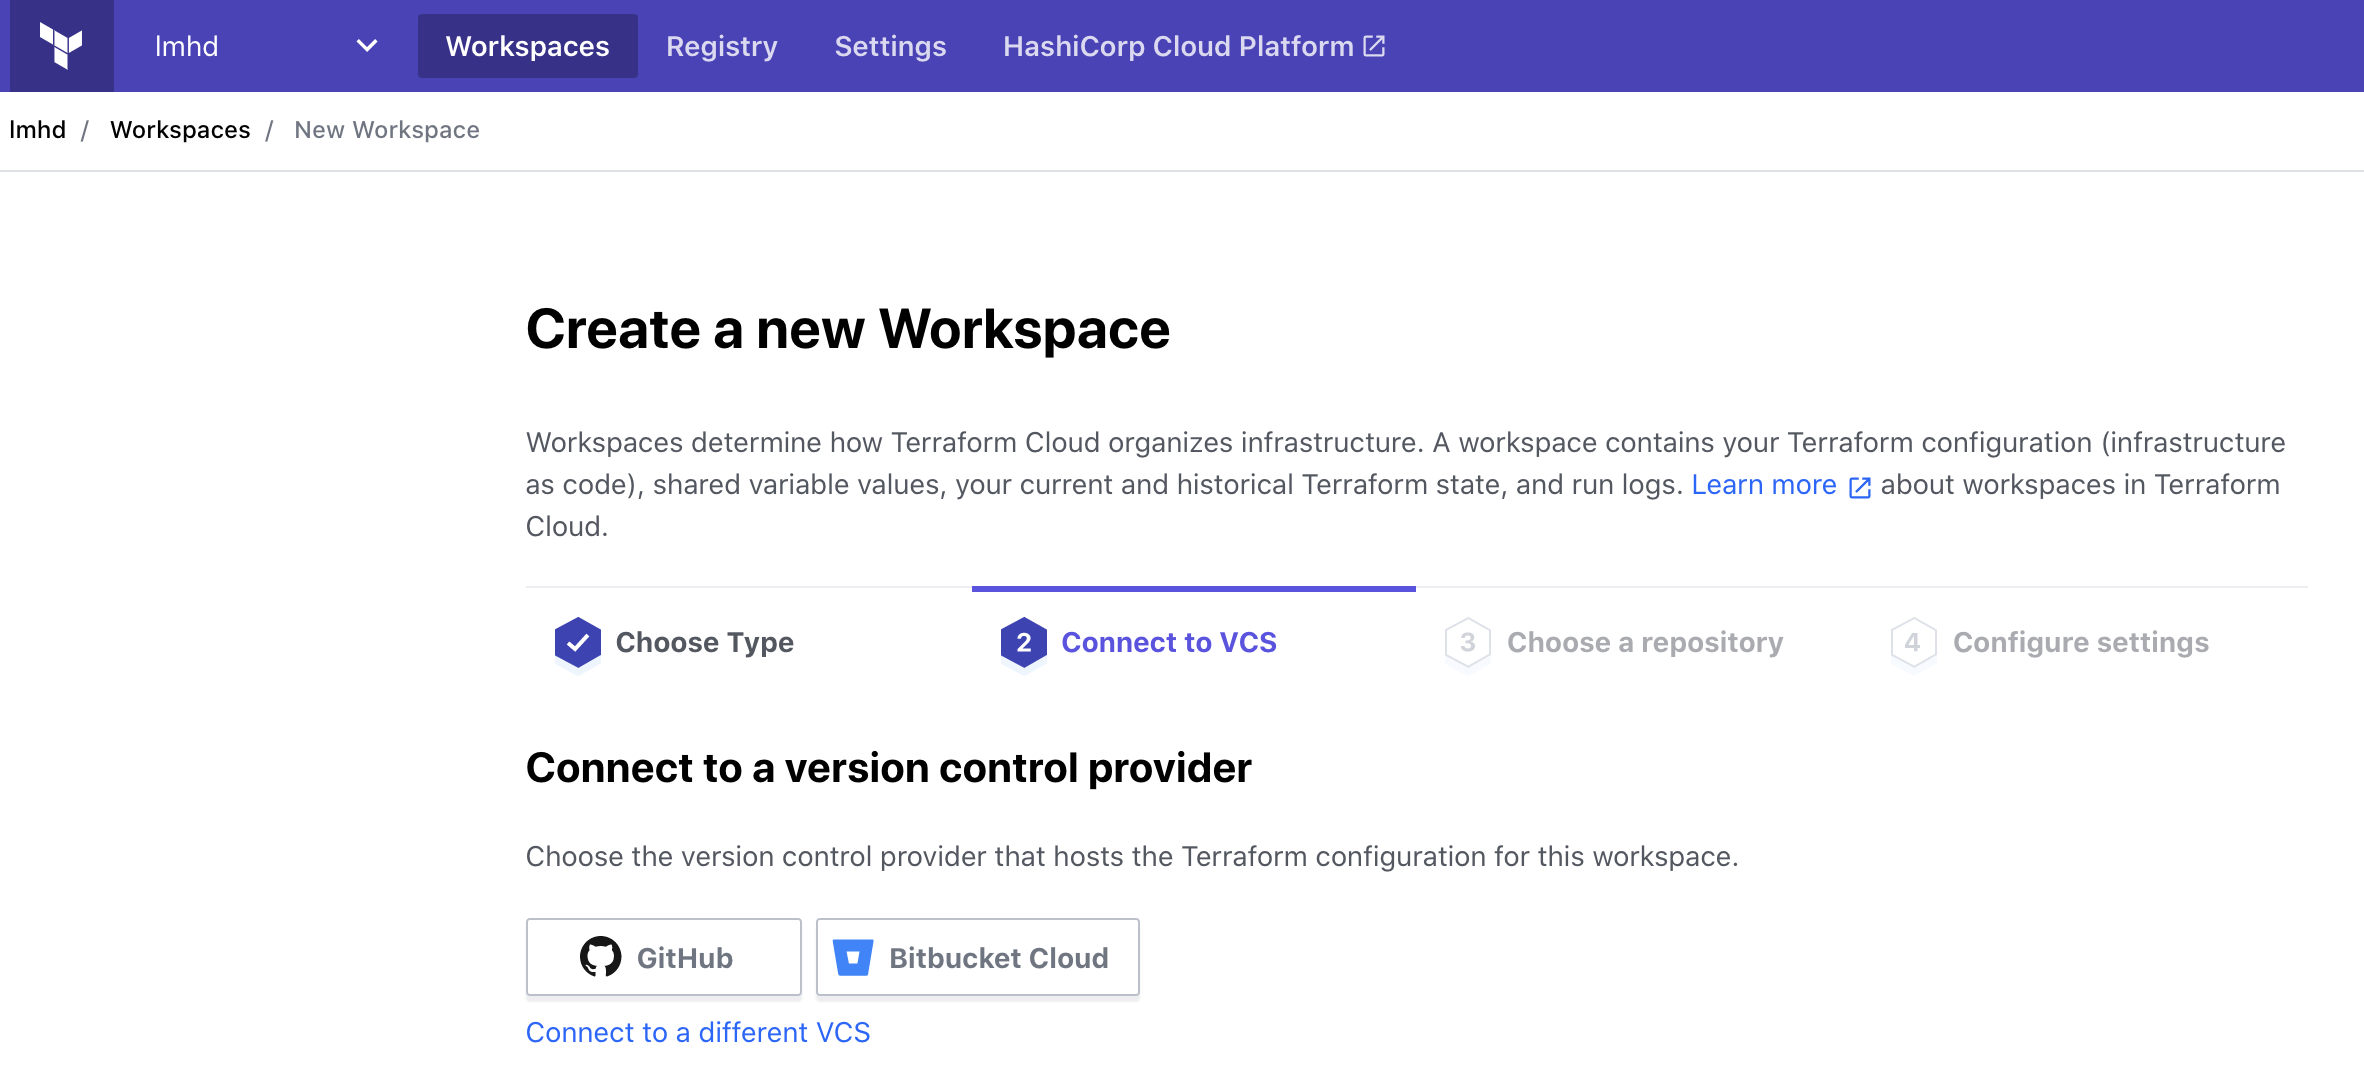 Terraform Cloud, Create a new Workspace UI, Step 2: Connect to VCS. Options in this example are GitHub and BitBucket, with the option to connect to a different VCS